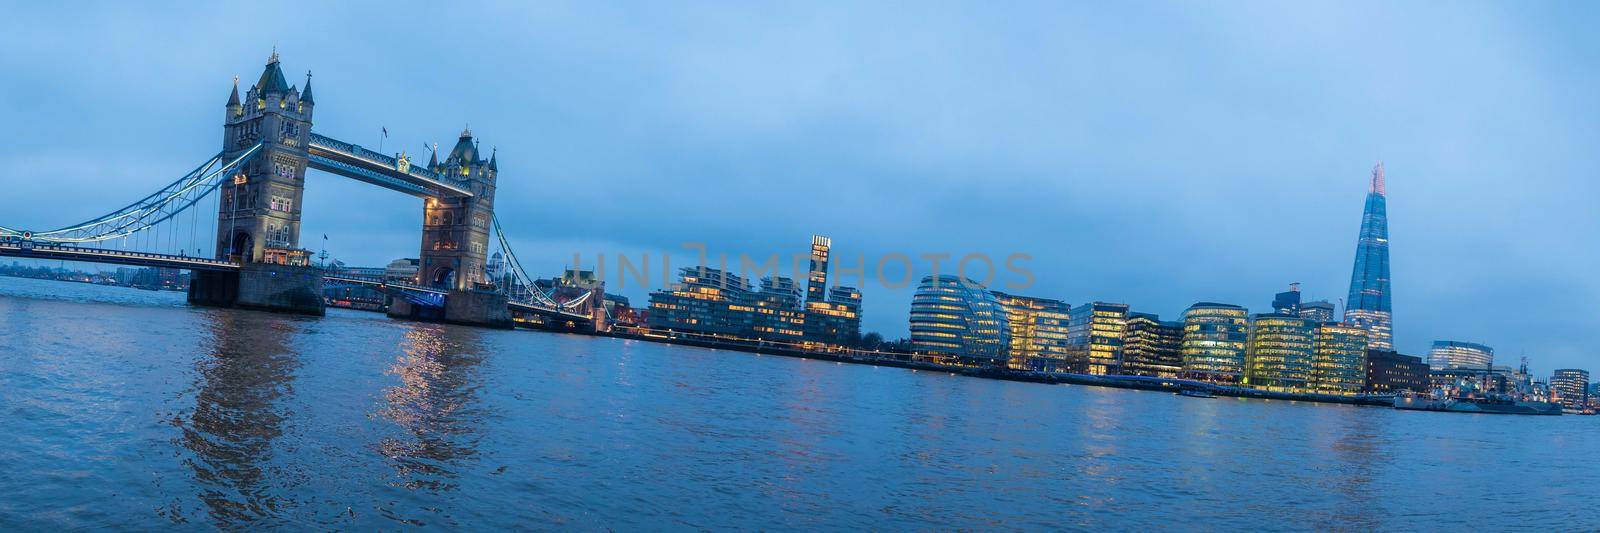 Panorama of the iconic Tower Bridge connecting Londong with Southwark on the Thames River with the London city skyline in the background with view of the Shard by jyurinko